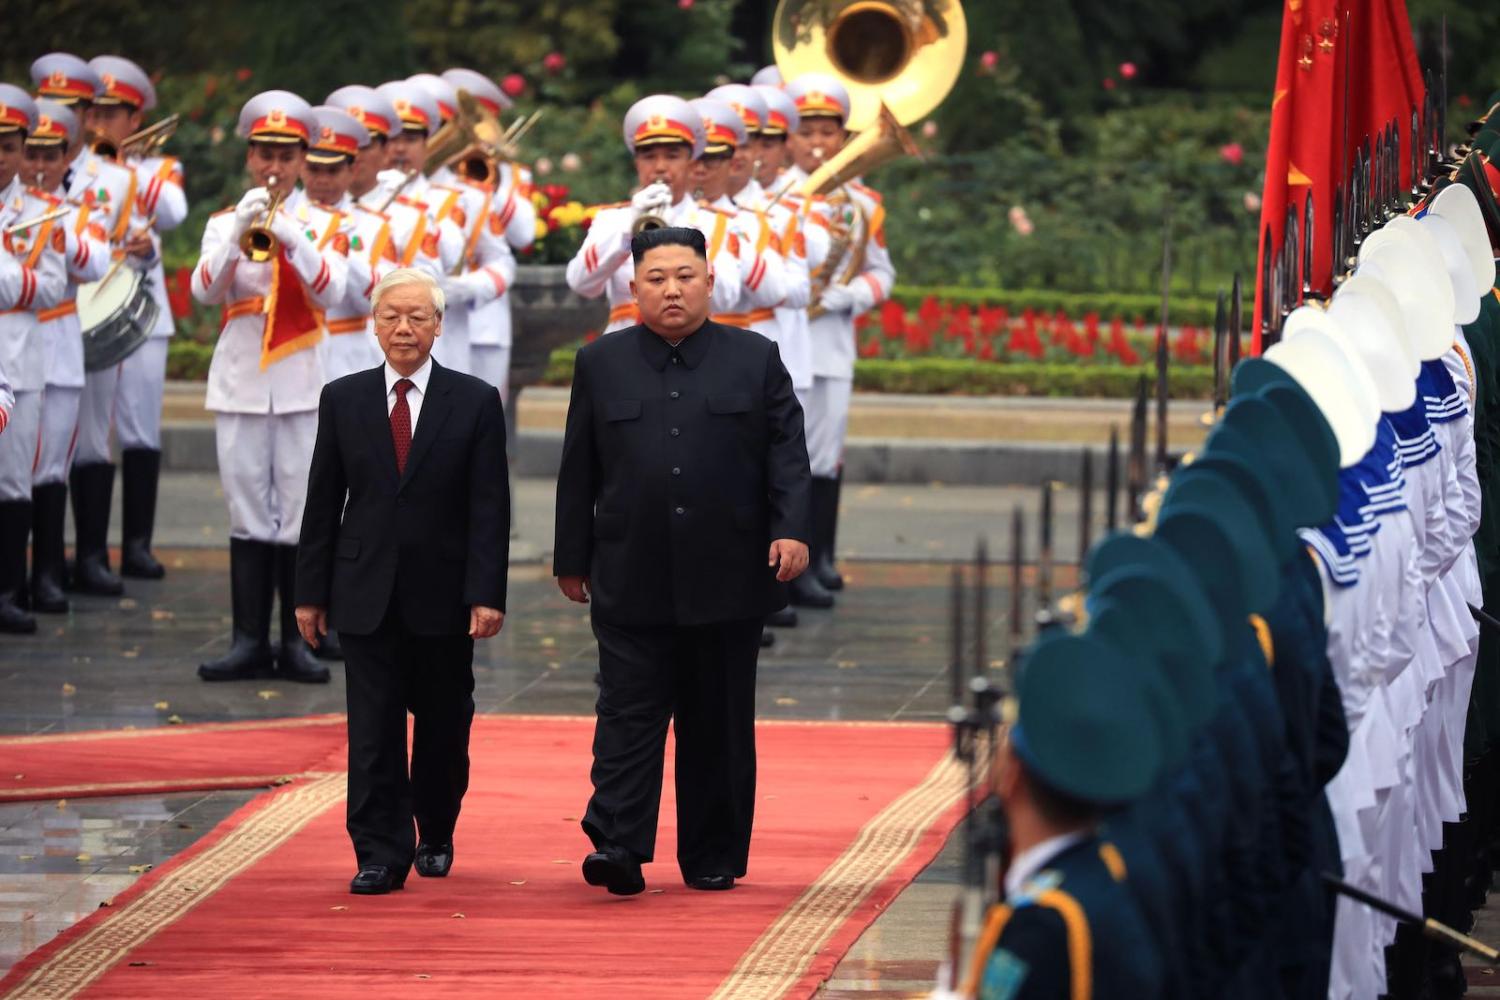 North Korean leader Kim Jong-un (right) attends a welcome ceremony with Vietnamese President Nguyen Phu Trong, 1 March 2019 in Hanoi (The Asahi Shimbun via Getty Images)